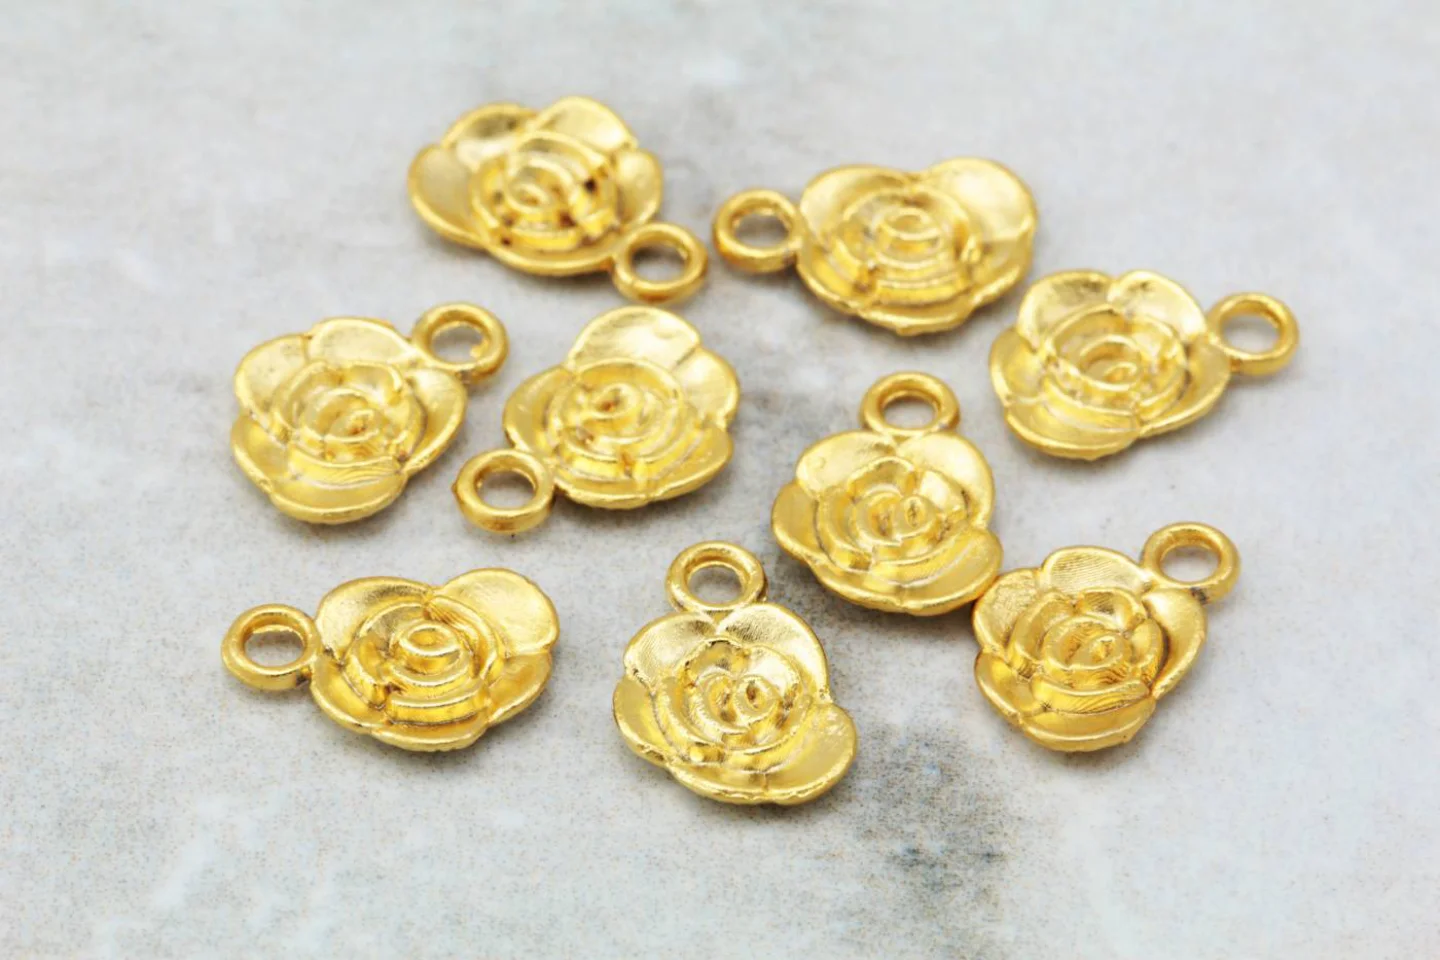 gold-plated-mini-rose-patterned-pendants.